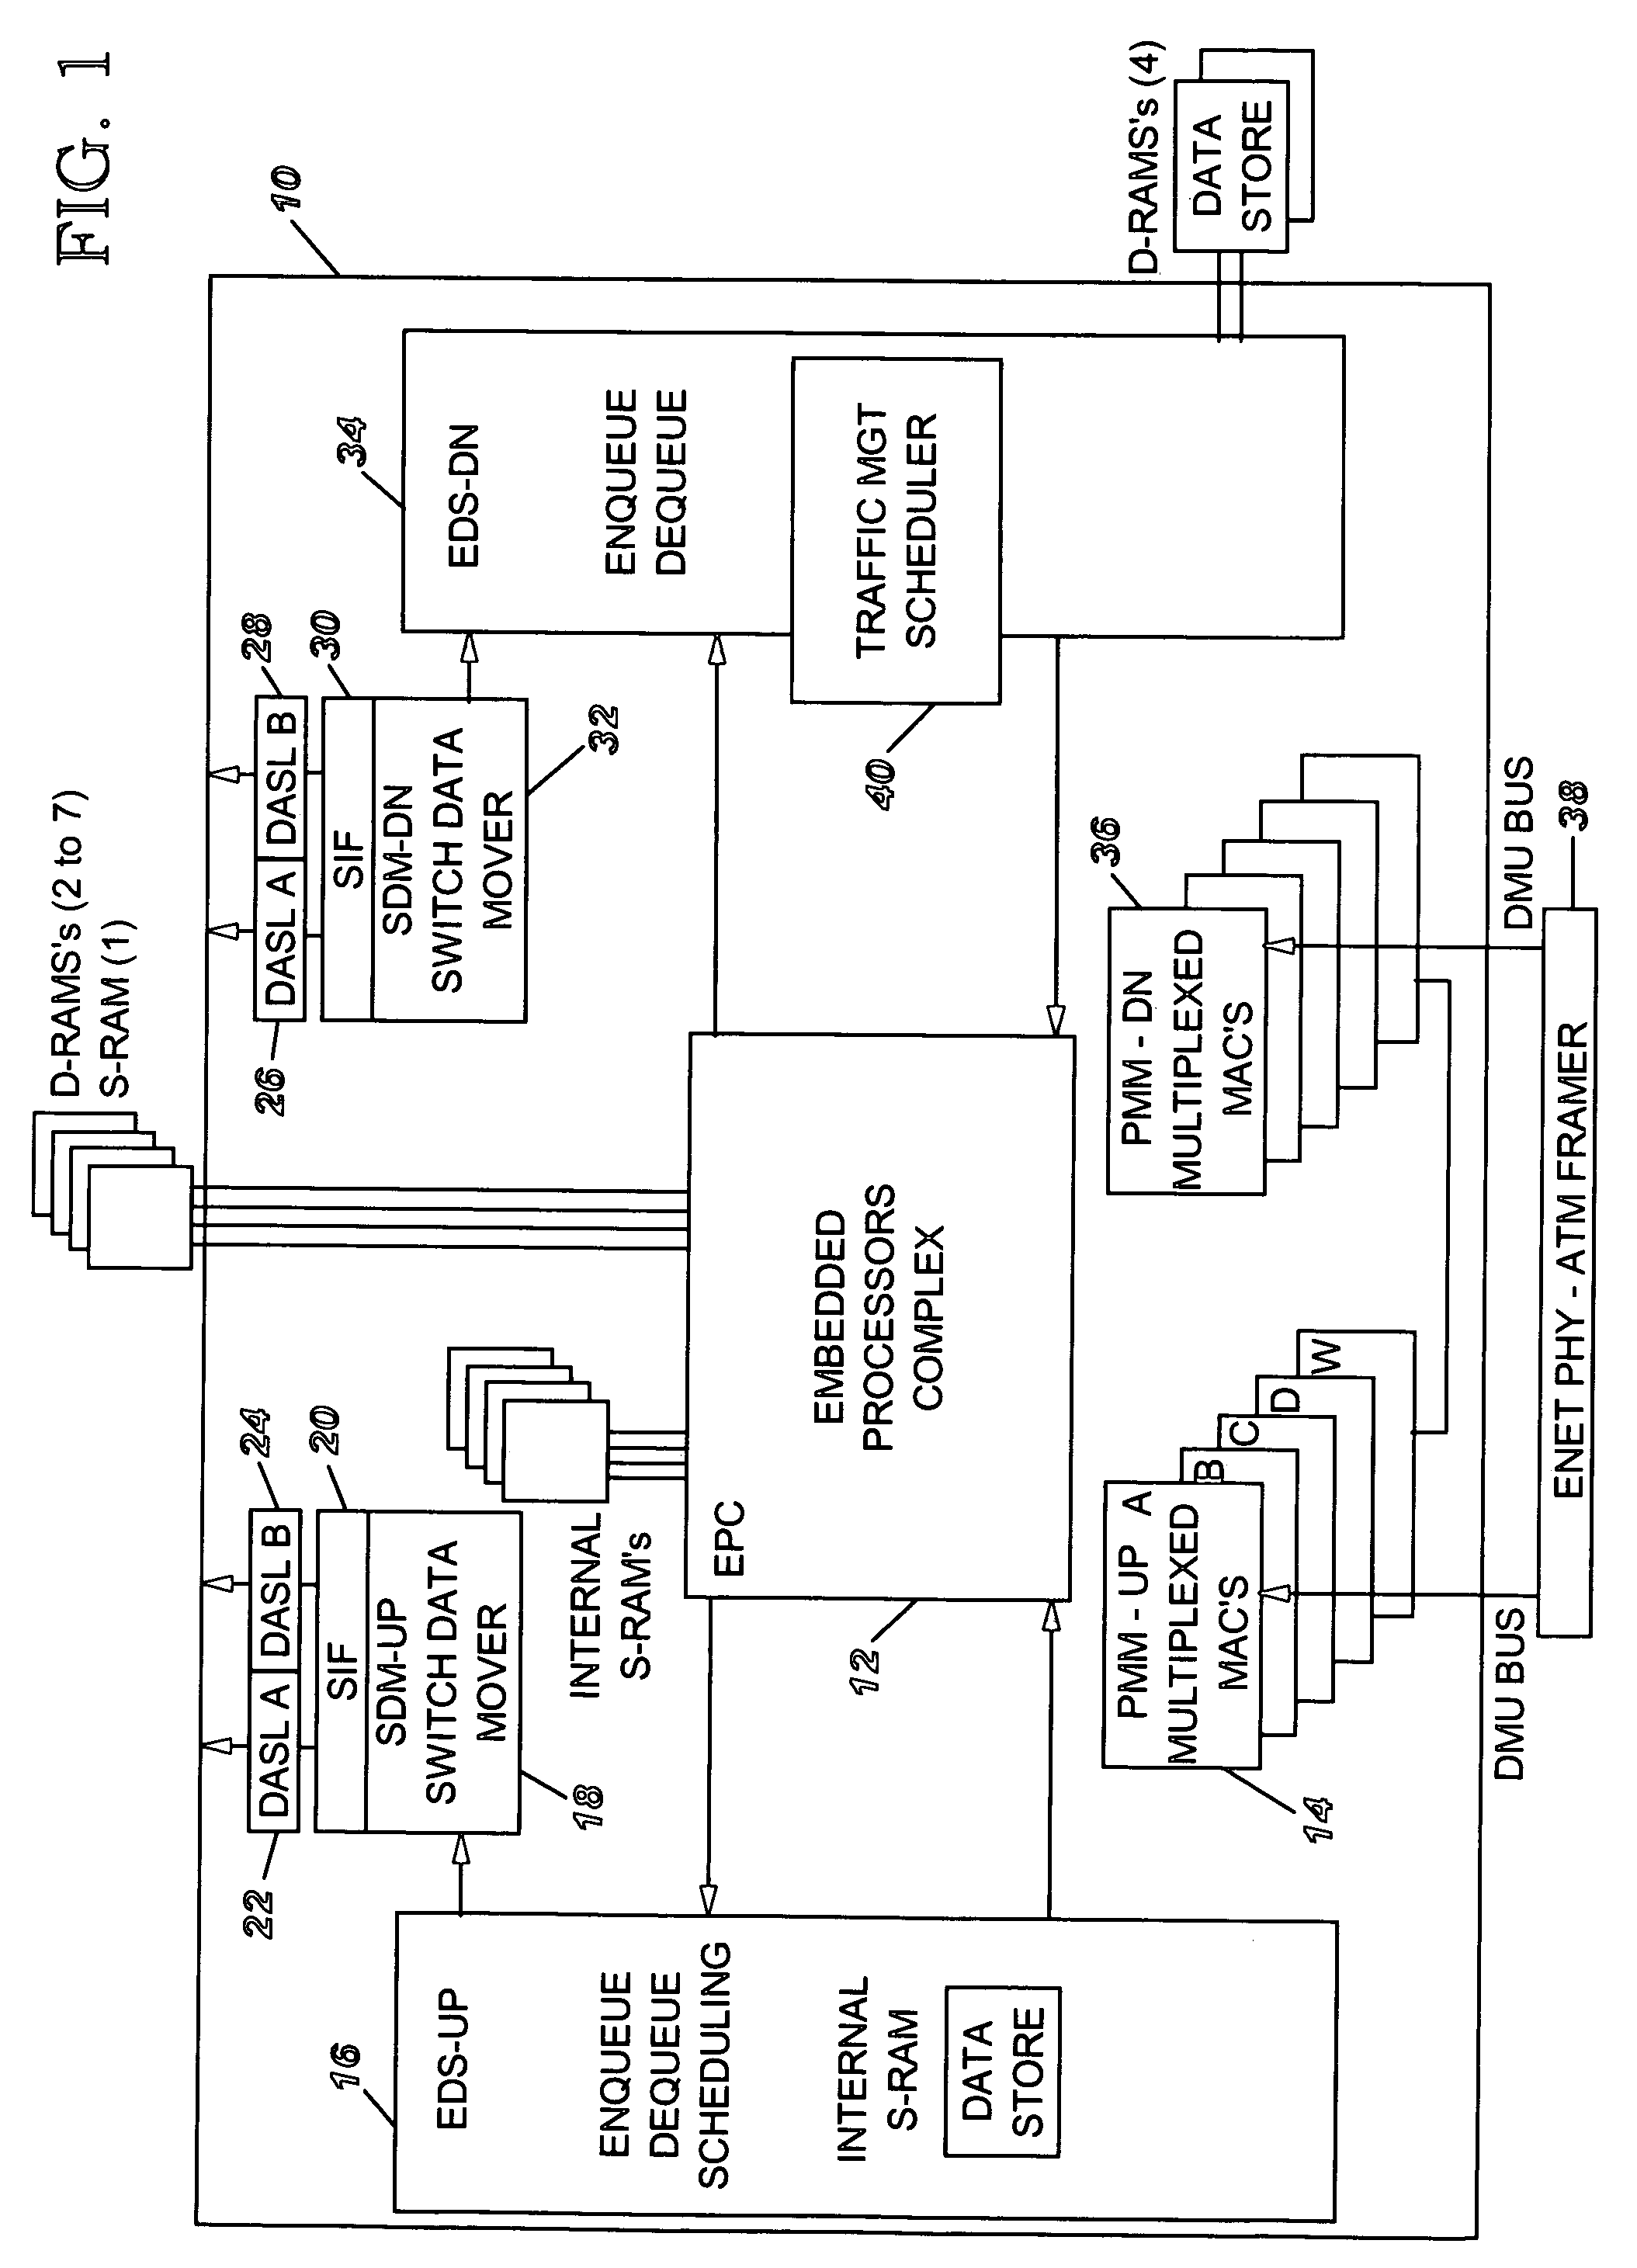 Method and system for network processor scheduling outputs using queueing